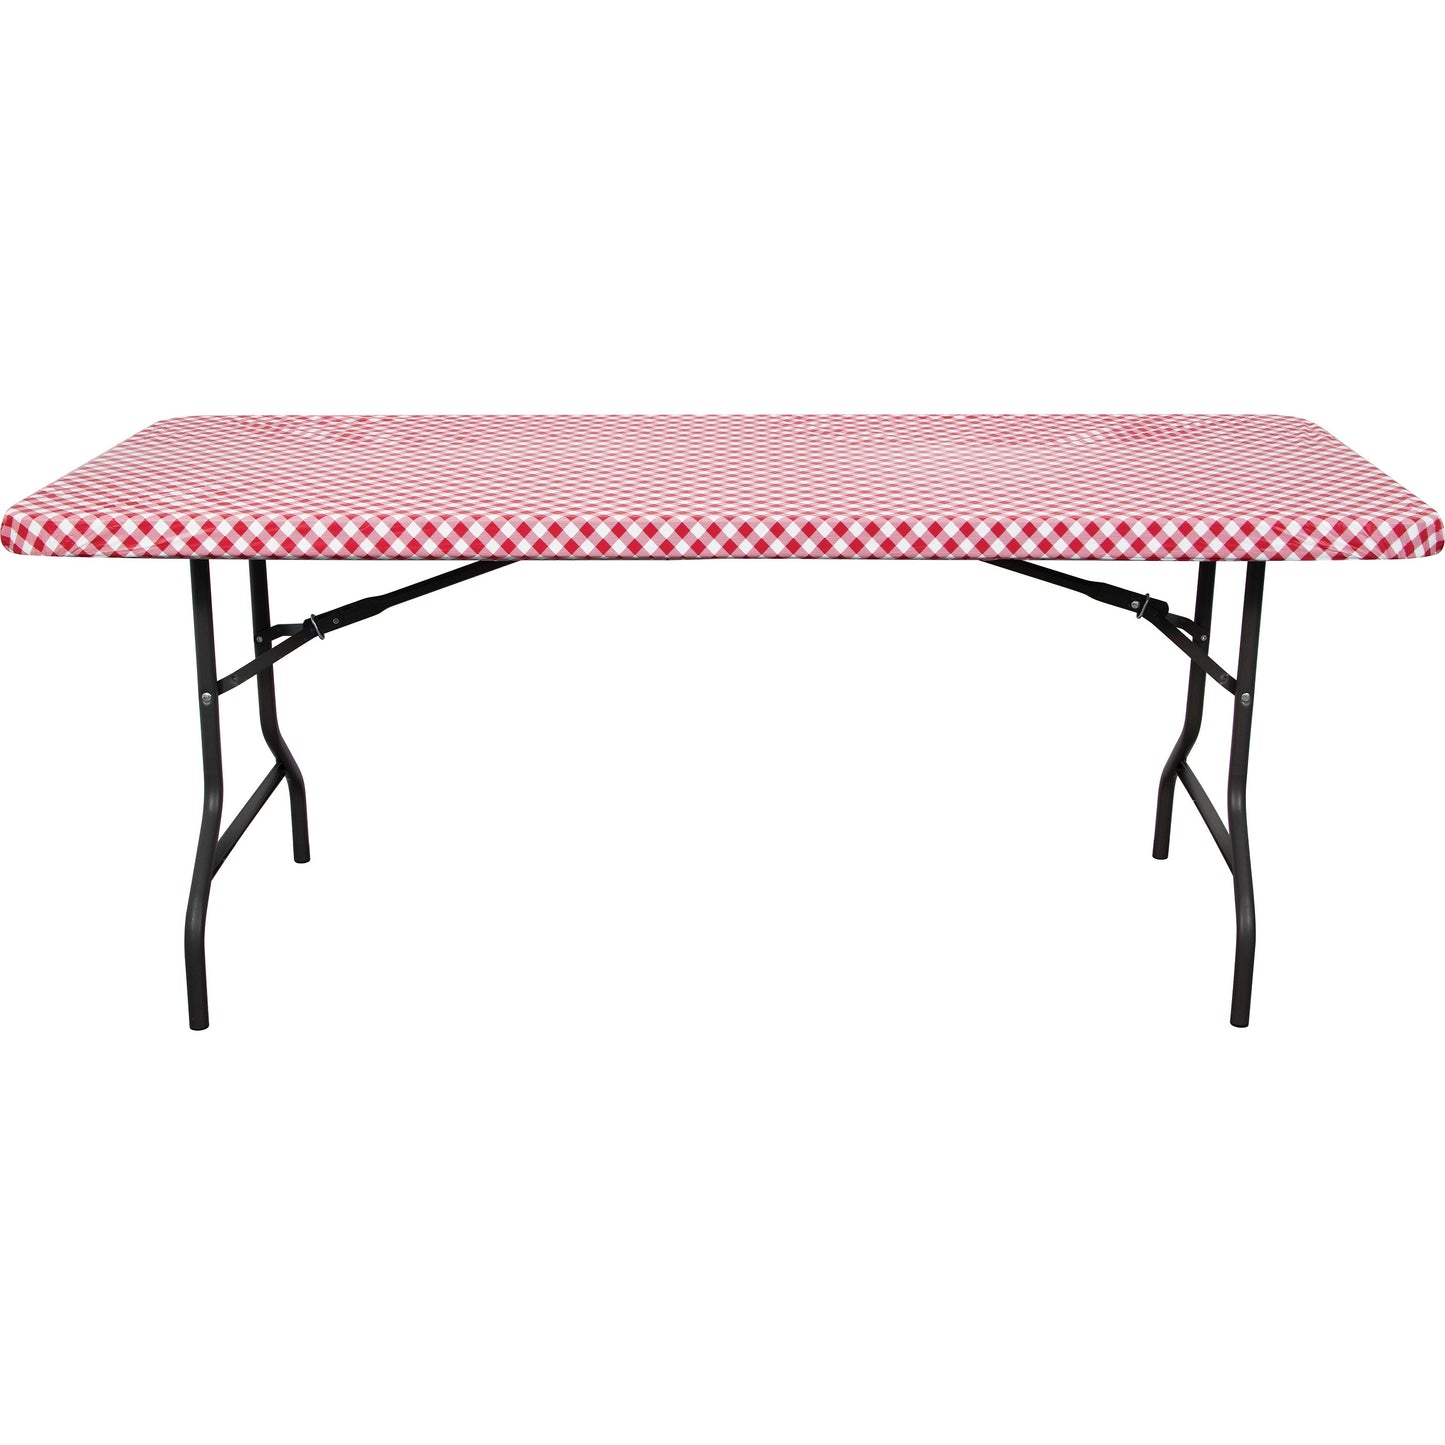 Table Cover (Stay Put 29x72) - Classic Gingham